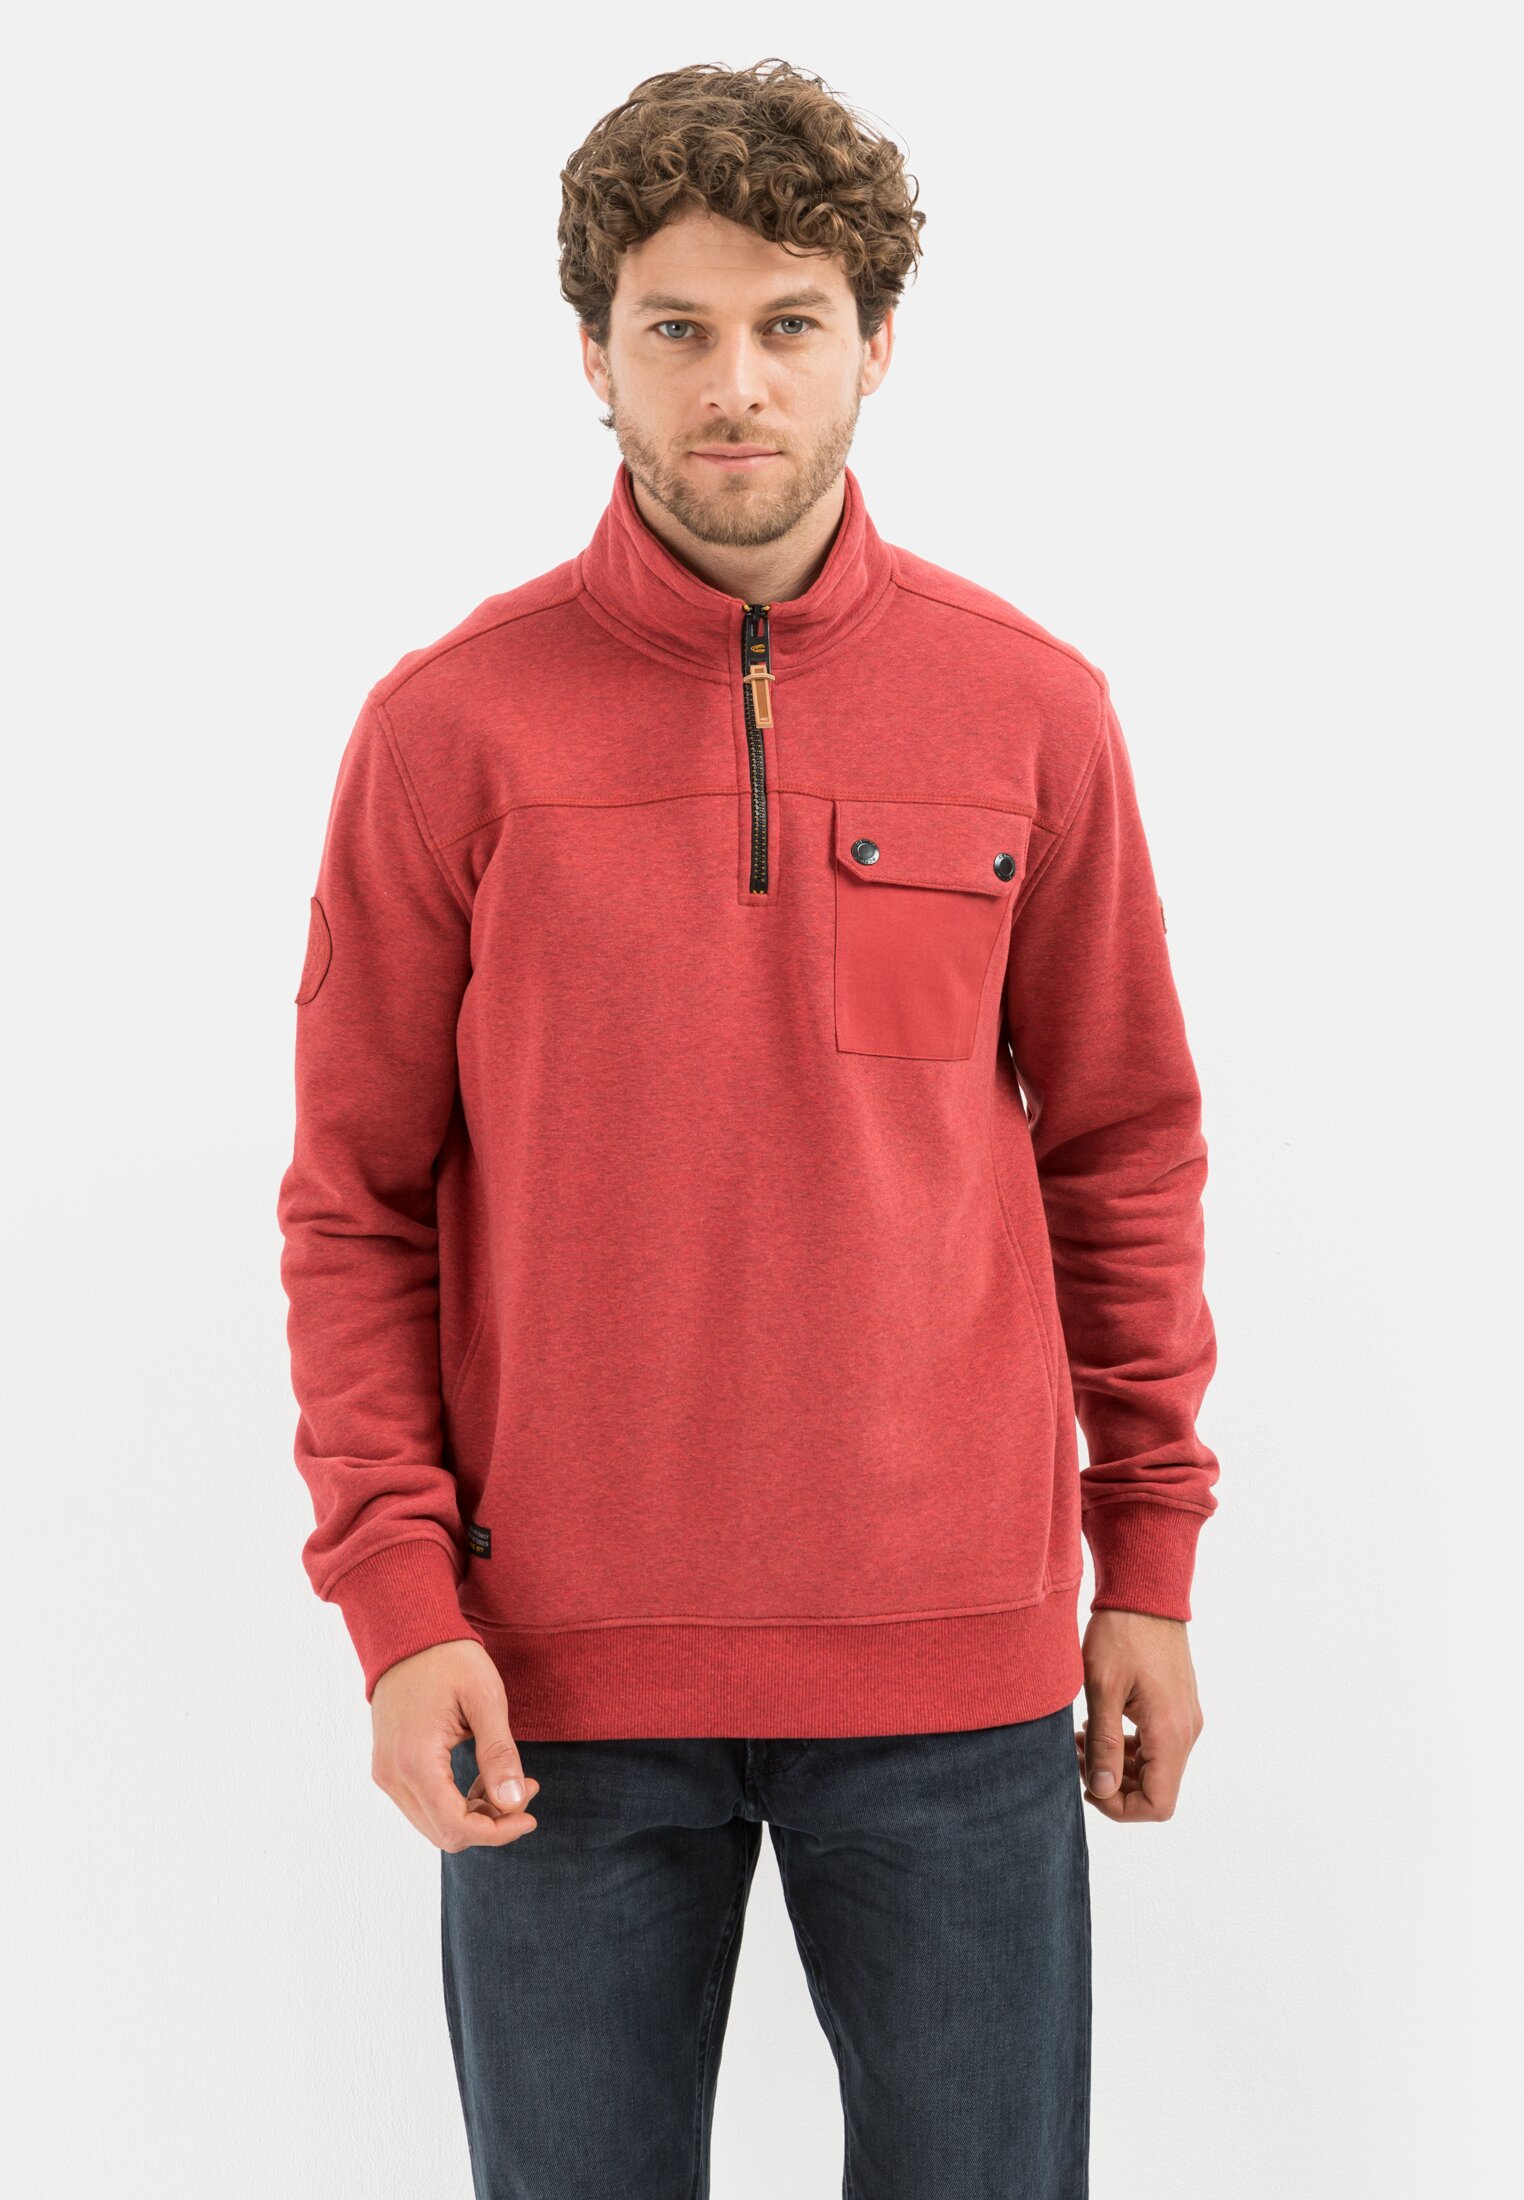 Camel Active Sweatshirt Troyer with stand-up collar